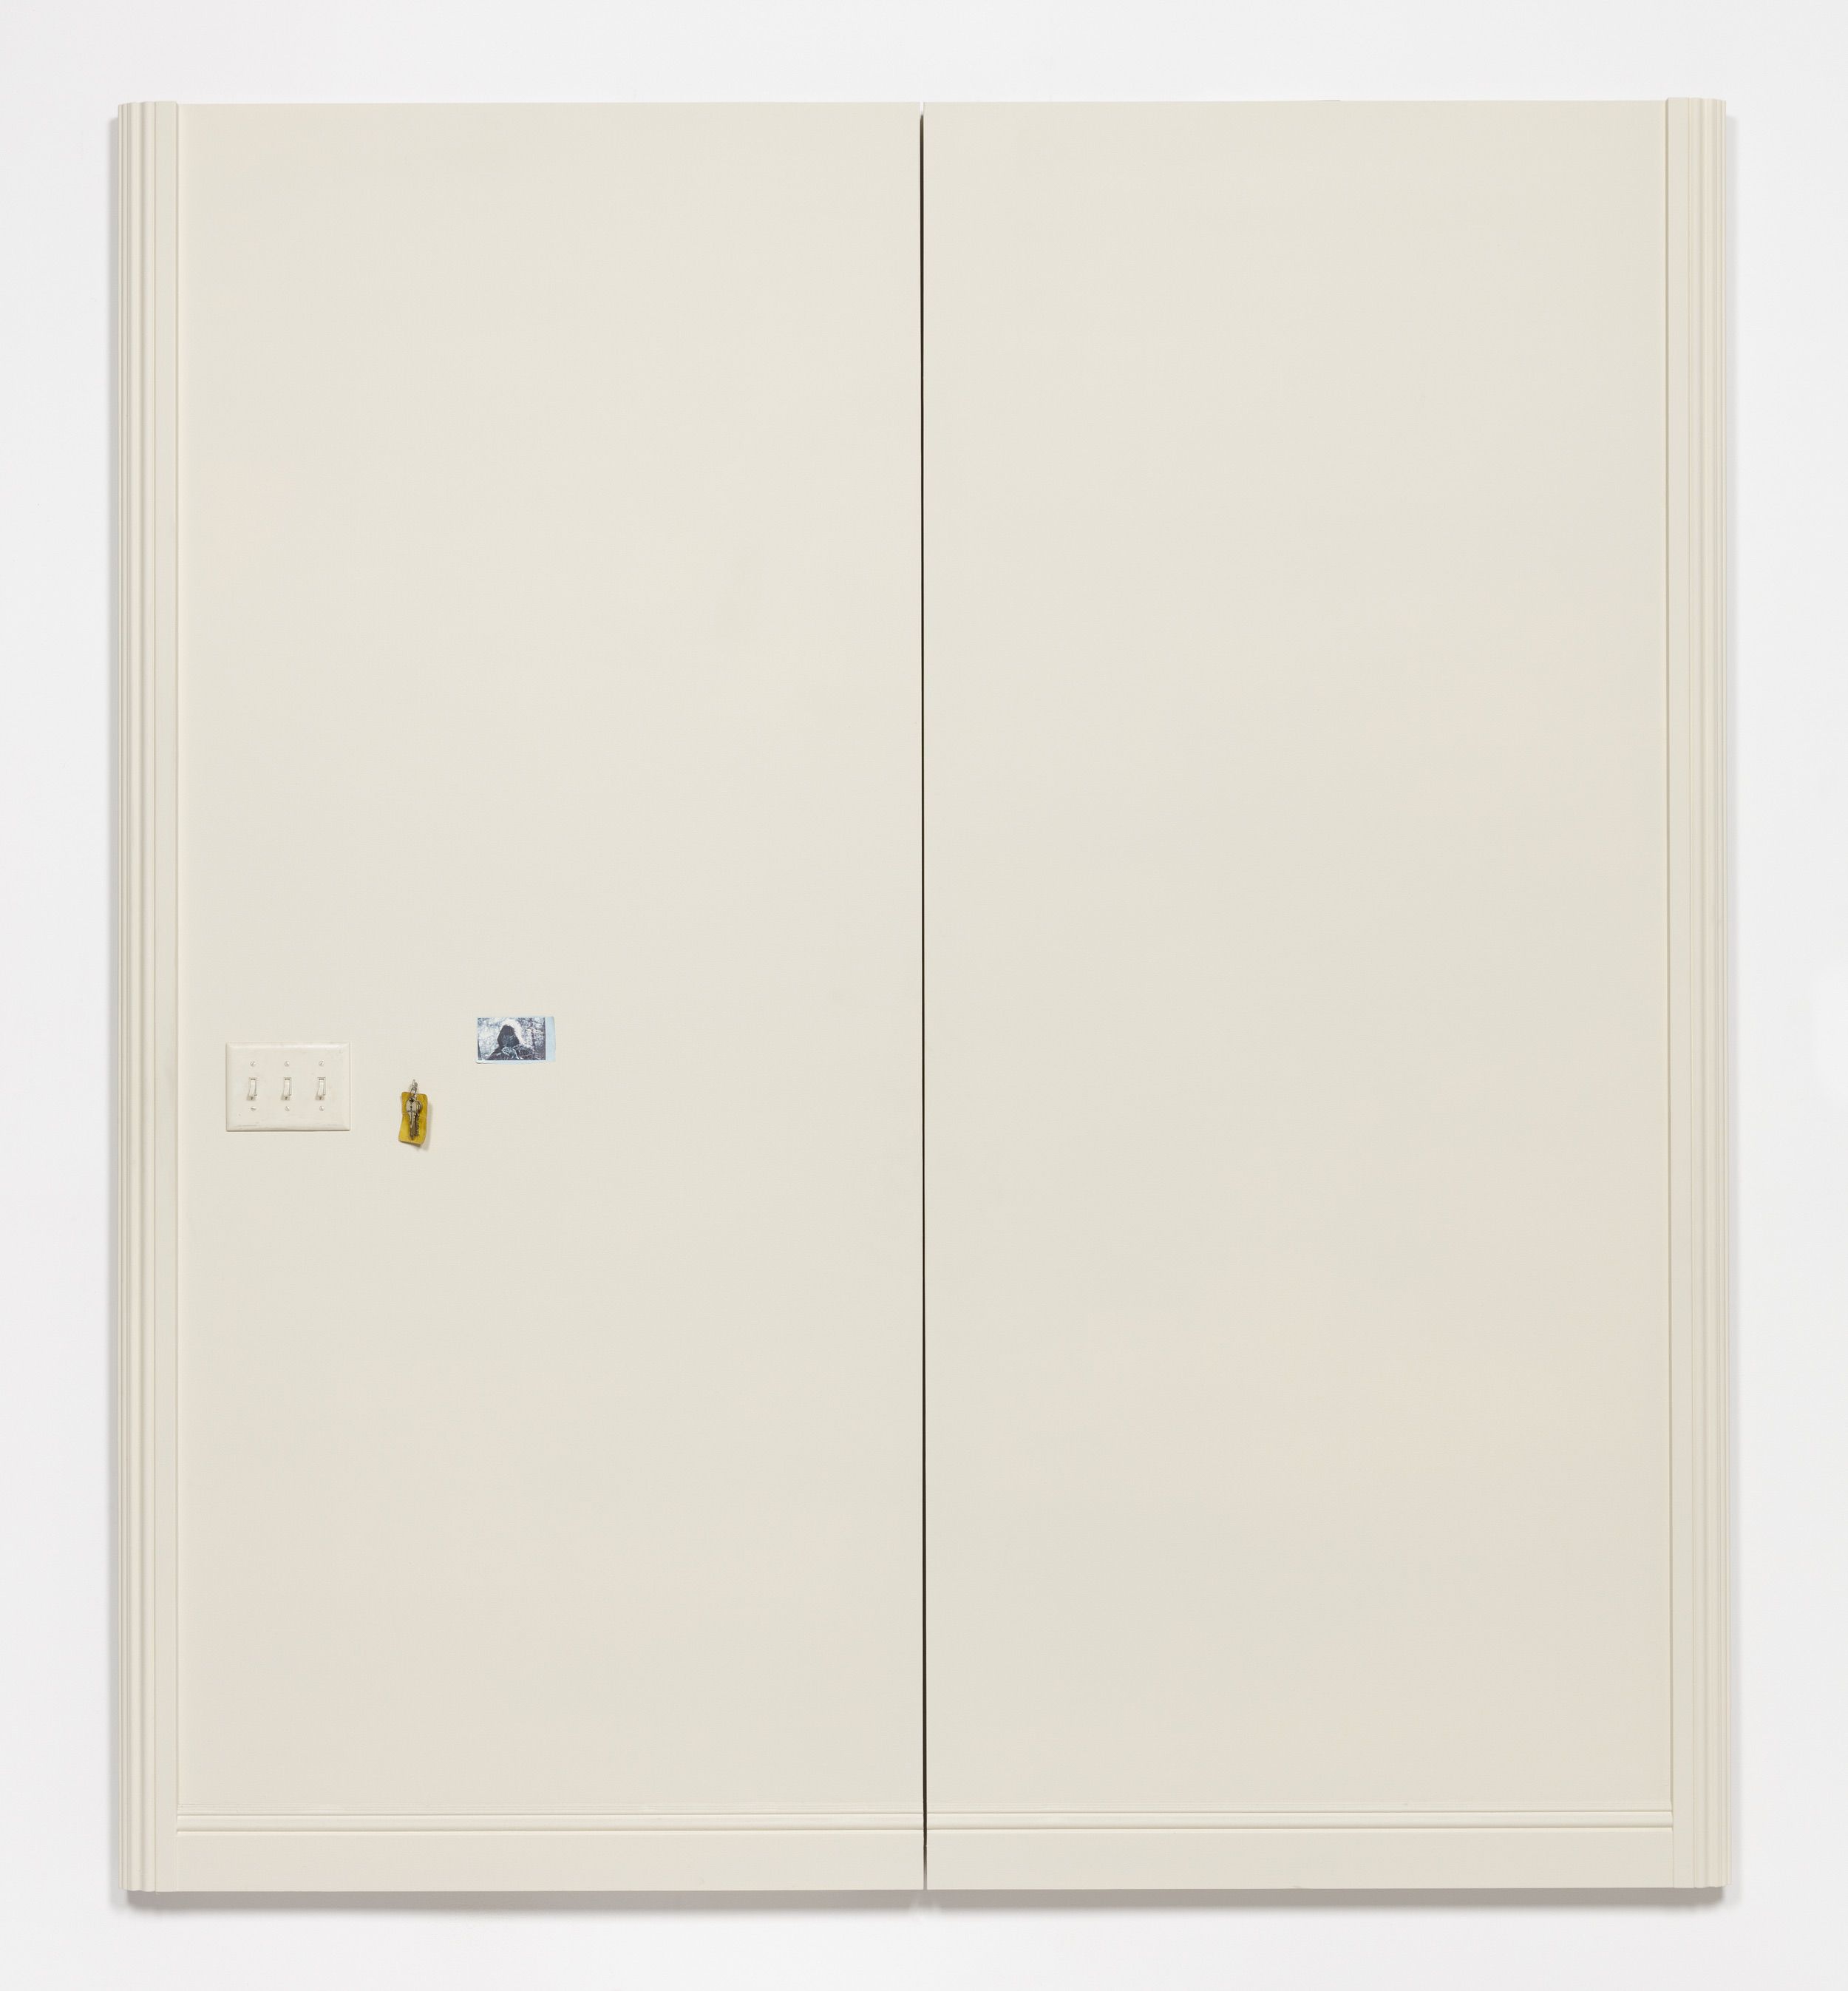  Andrew Chapman  Templates for Recall (1) , 2018 Light switches, moulding, keys/key hook, pastel, magazine clipping, and latex paint on panels 95 x 86.5 x 2 inches overall 